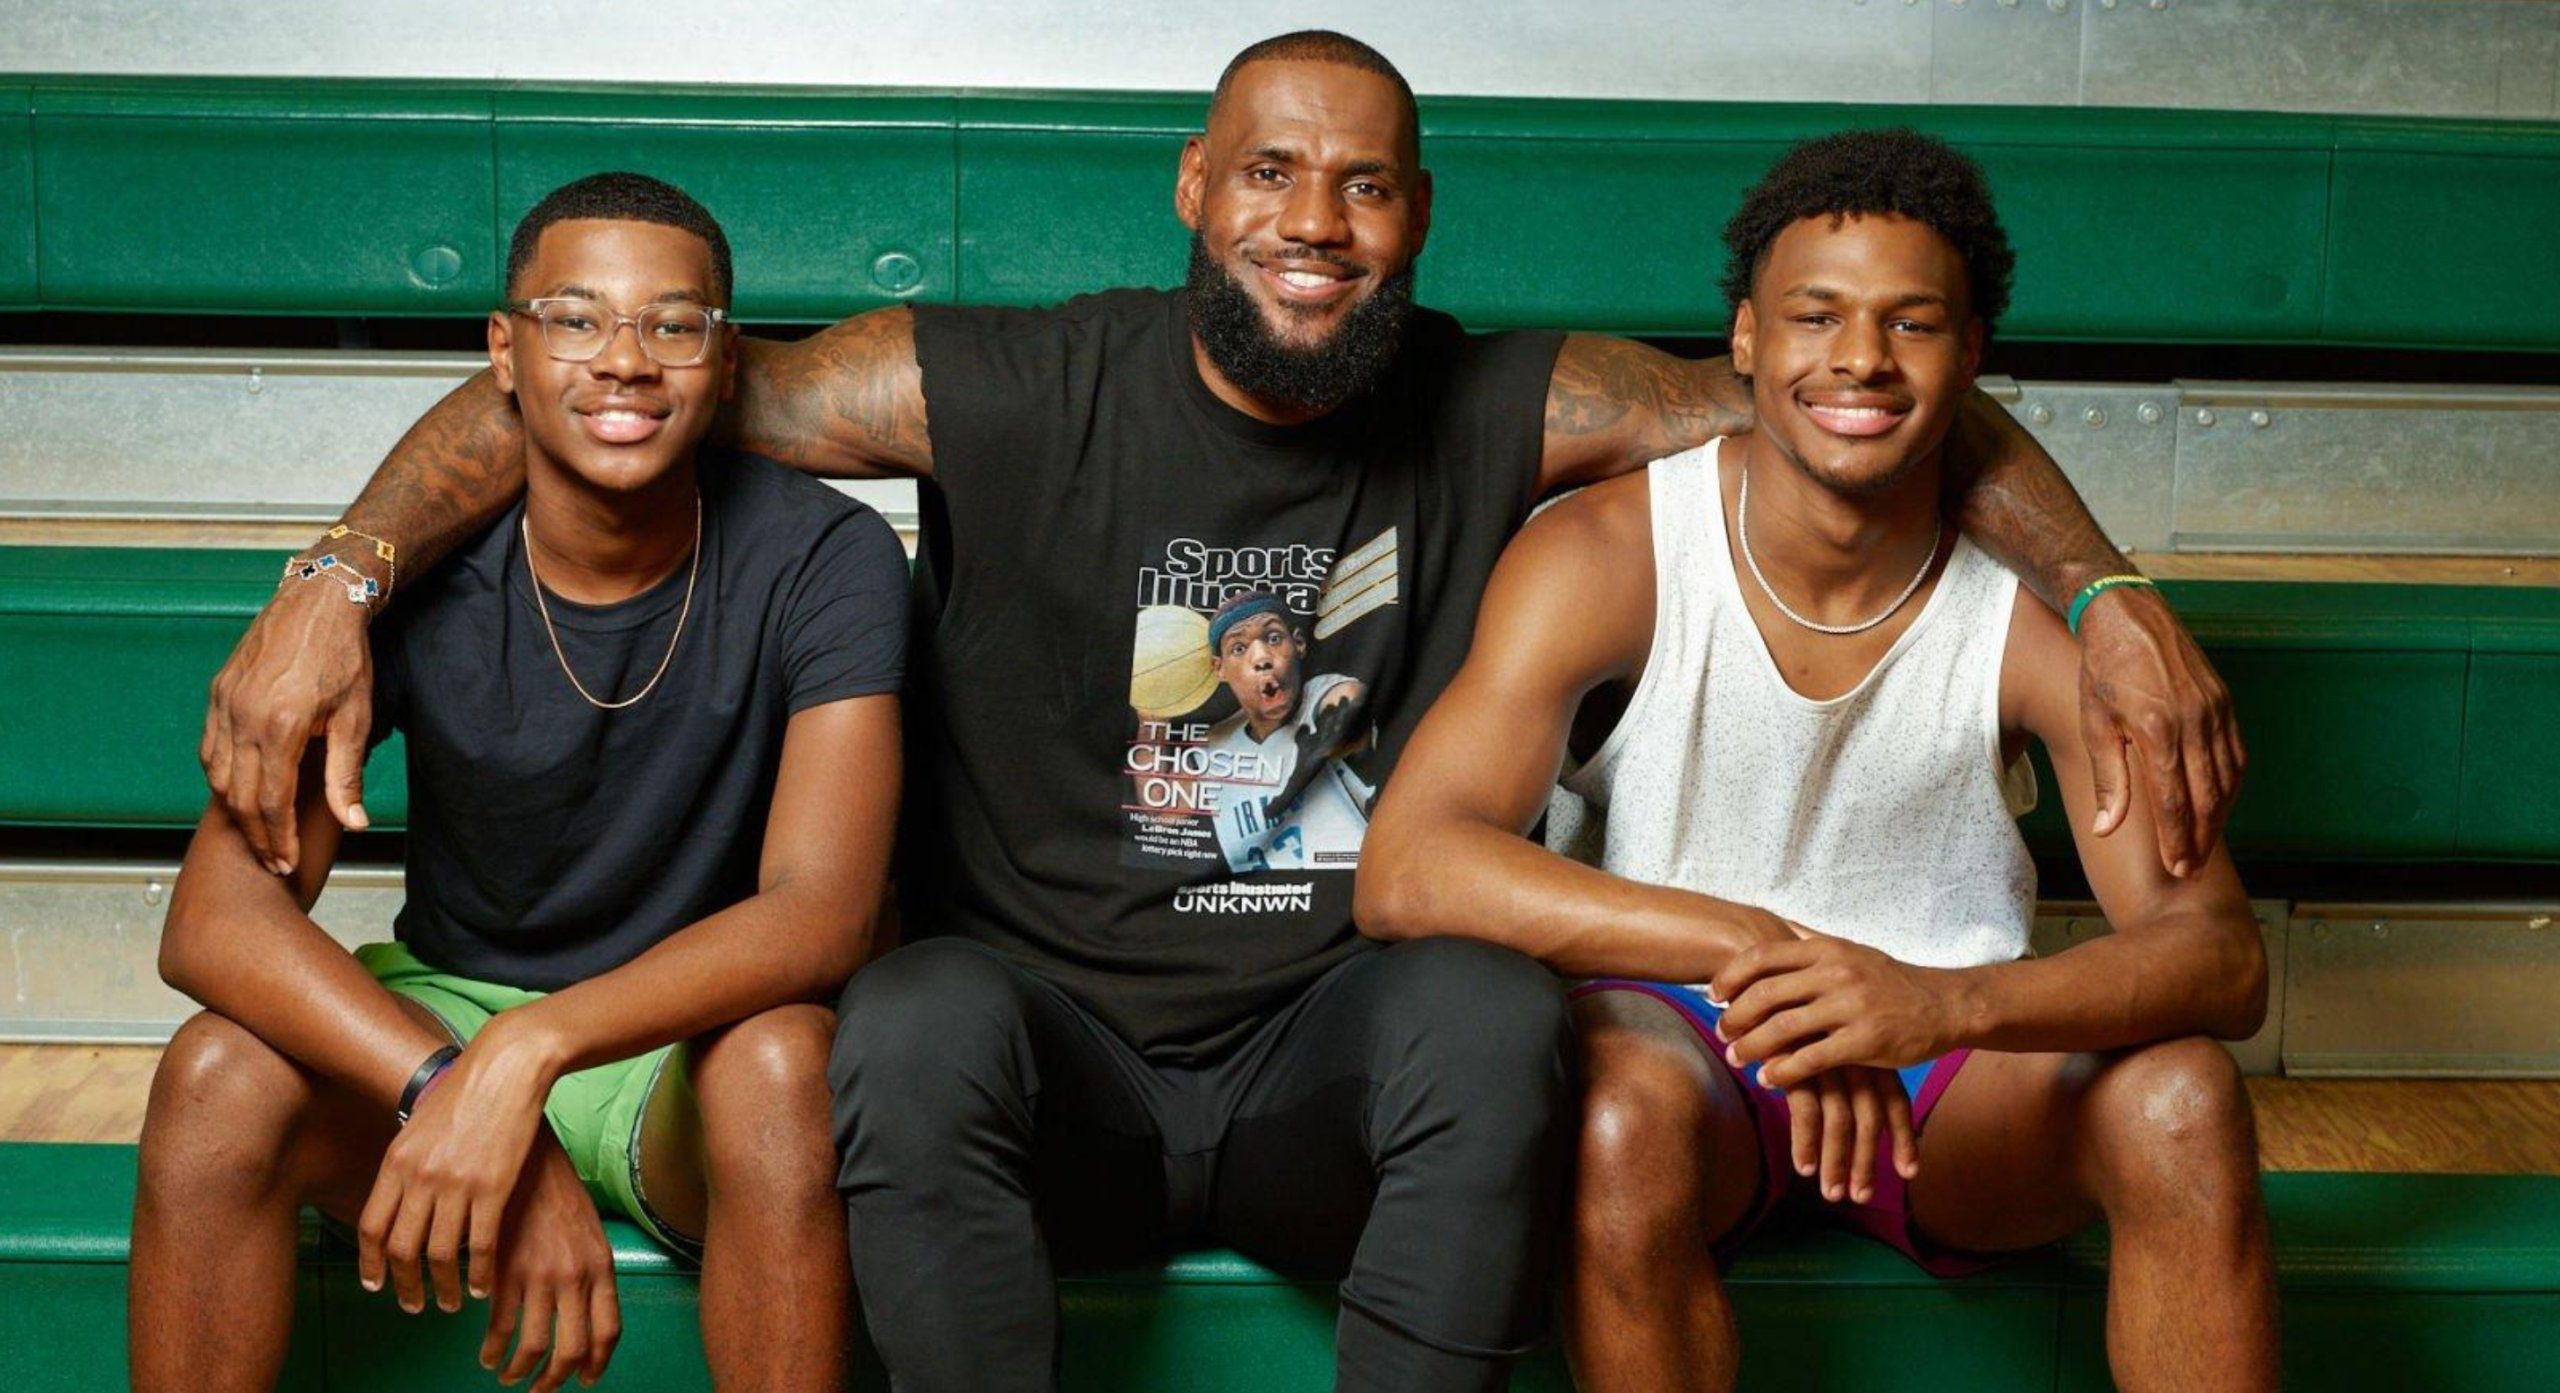 Basketball: Portrait of Los Angeles Lakers LeBron James (6) and his two sons Bronny James and Bryce James at St. Vincent-St. Mary High School. Akron, OH 7/1/2022 CREDIT: Jeffery A. Salter (Photo by Jeffery Salter/Sports Illustrated via Getty Images)